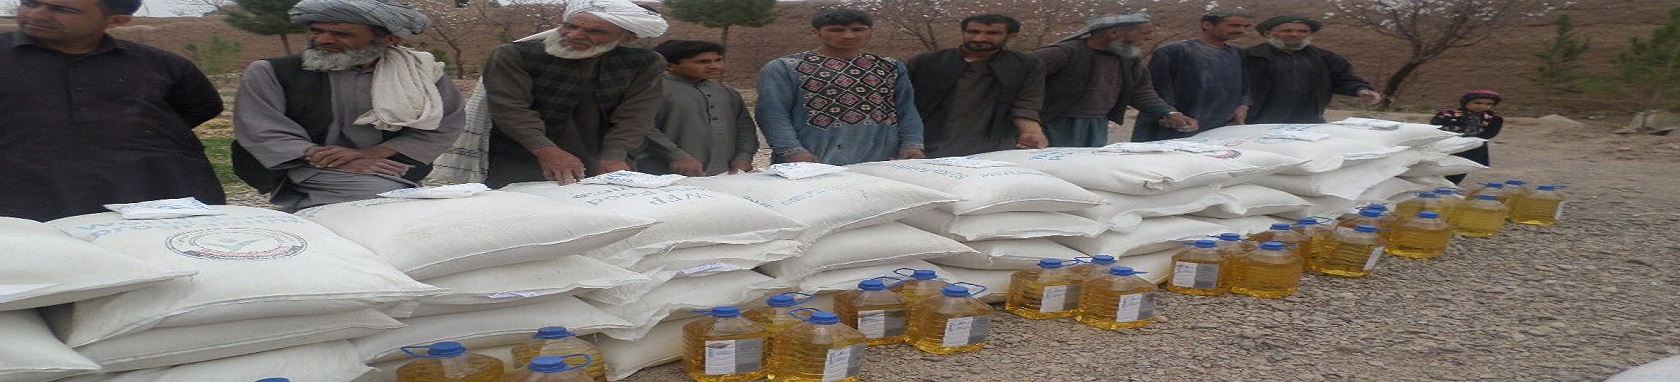 Food distribution for 27 conflicted affected vulnerable families in Karukh district